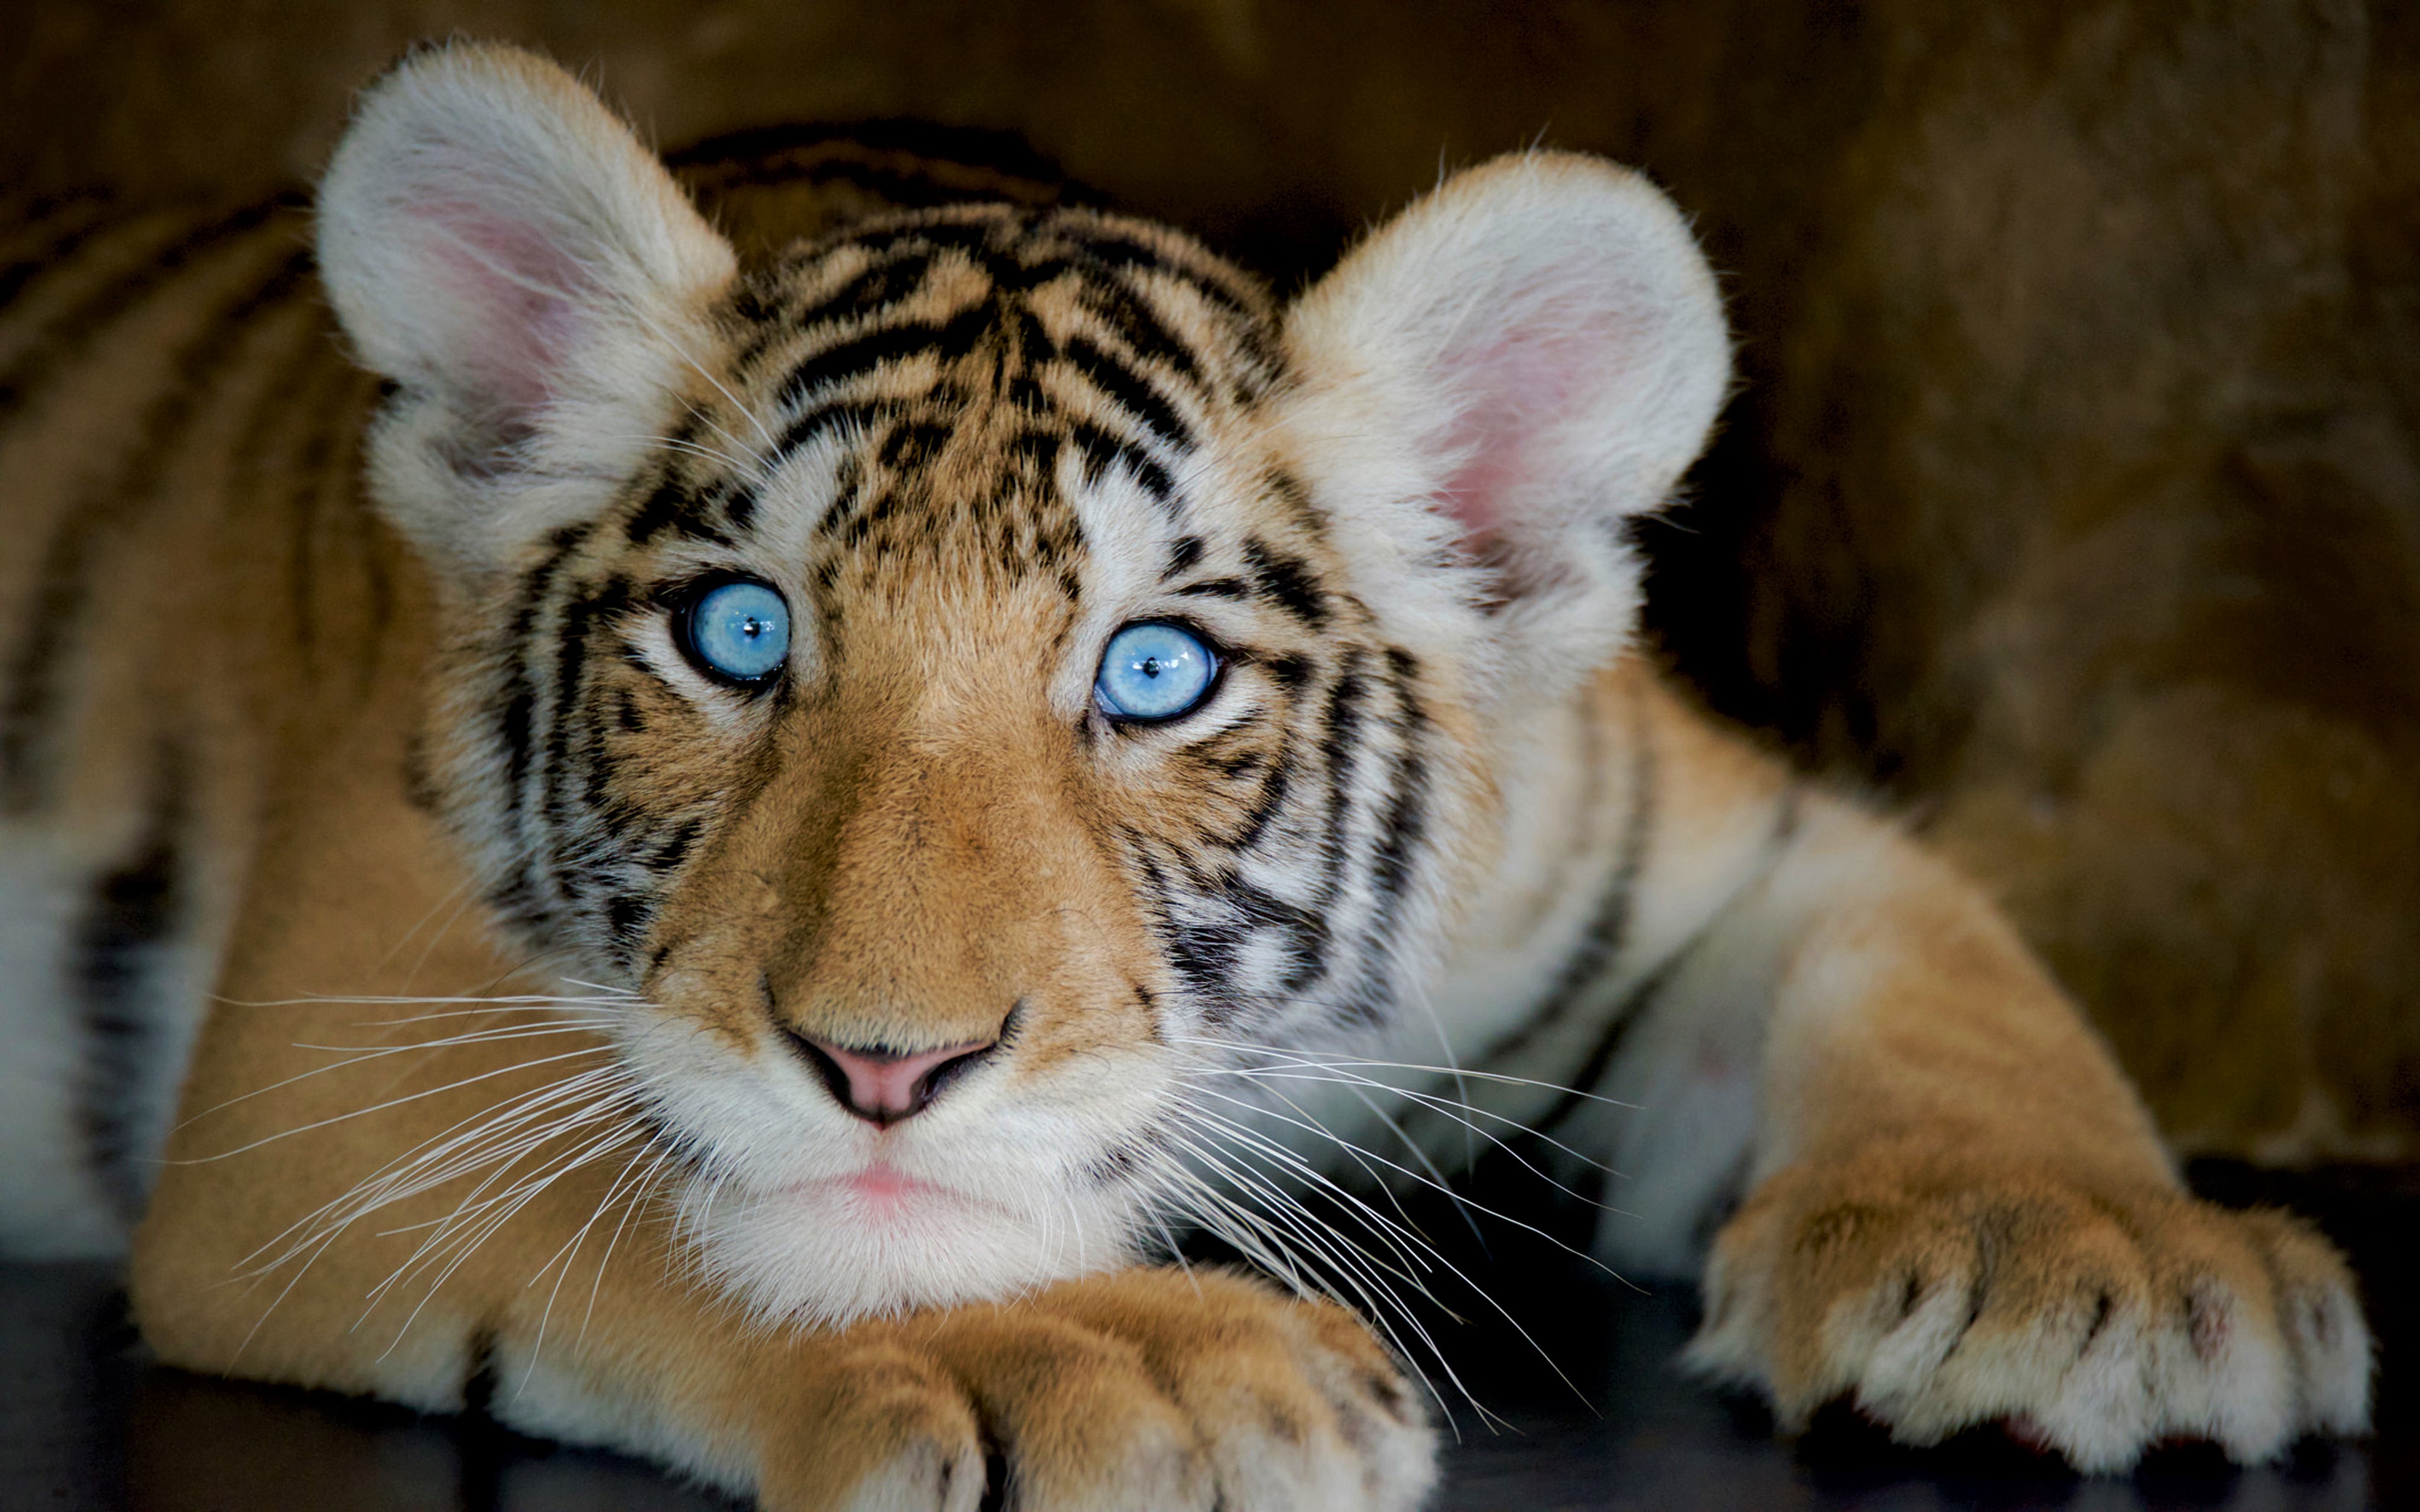 Baby Tiger 4k Ultra HD Wallpaper | Background Image | 3840x2400 | ID ...